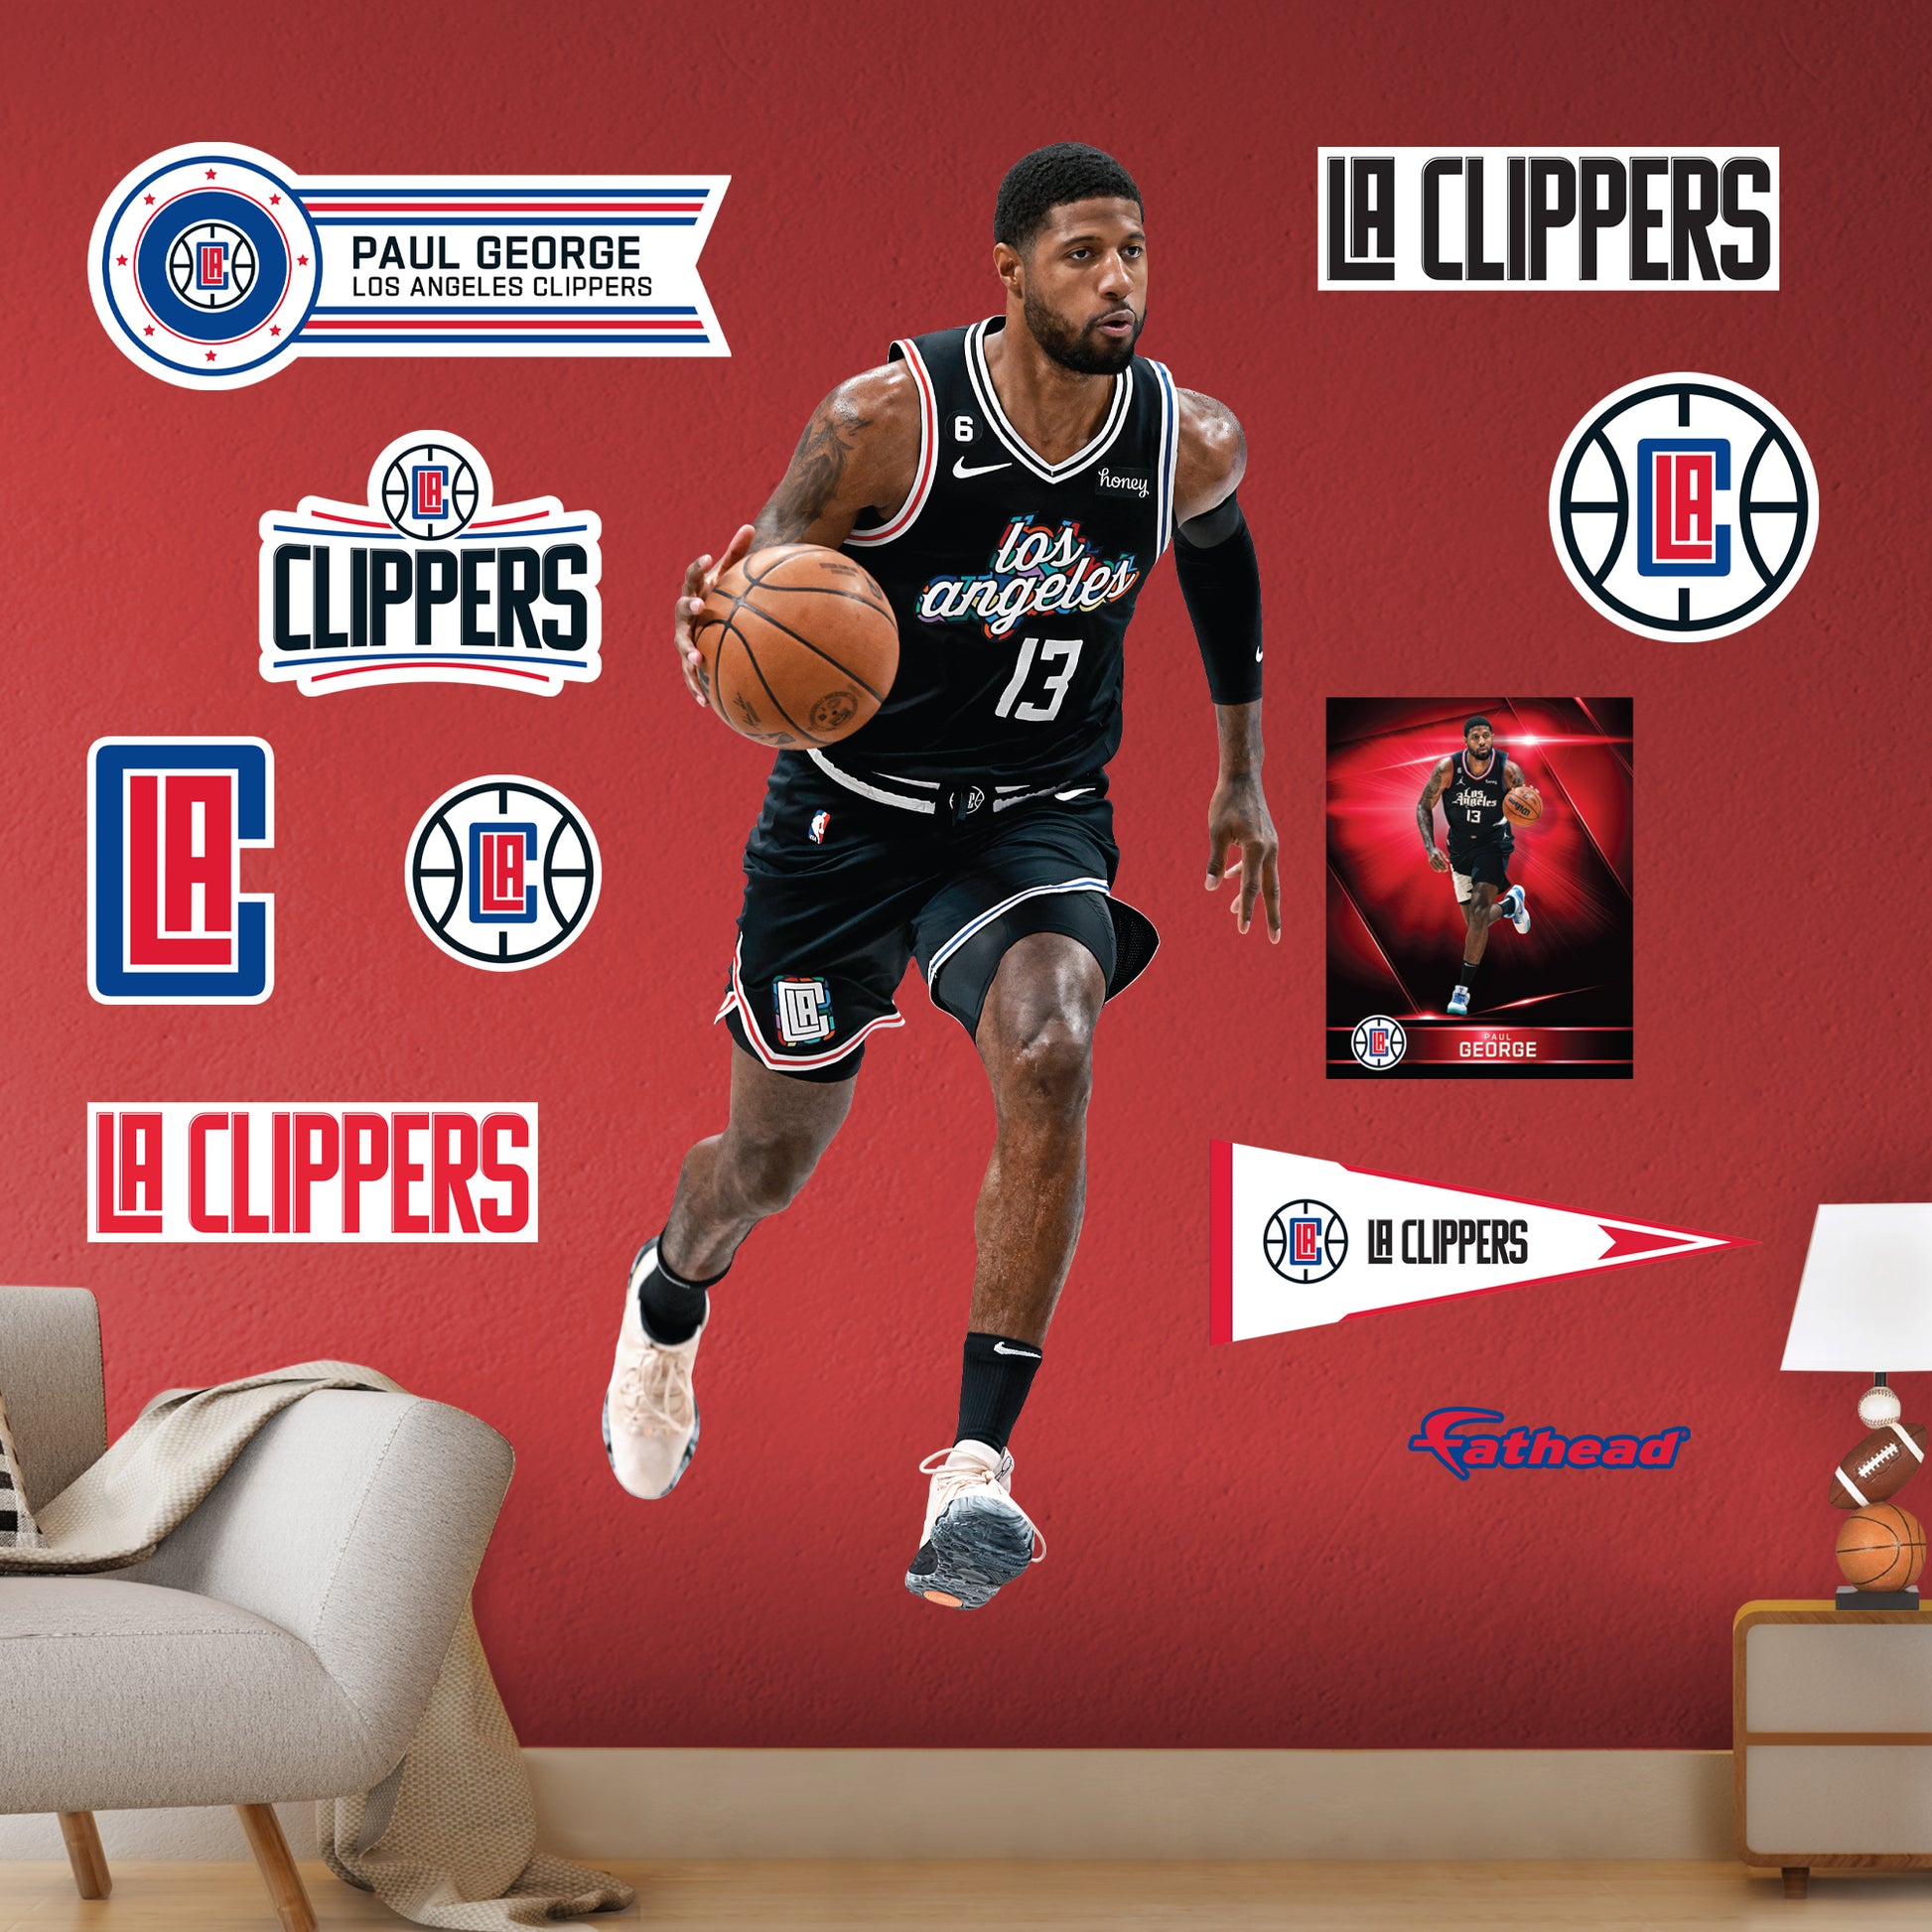 LA Clippers officially acquire Paul George